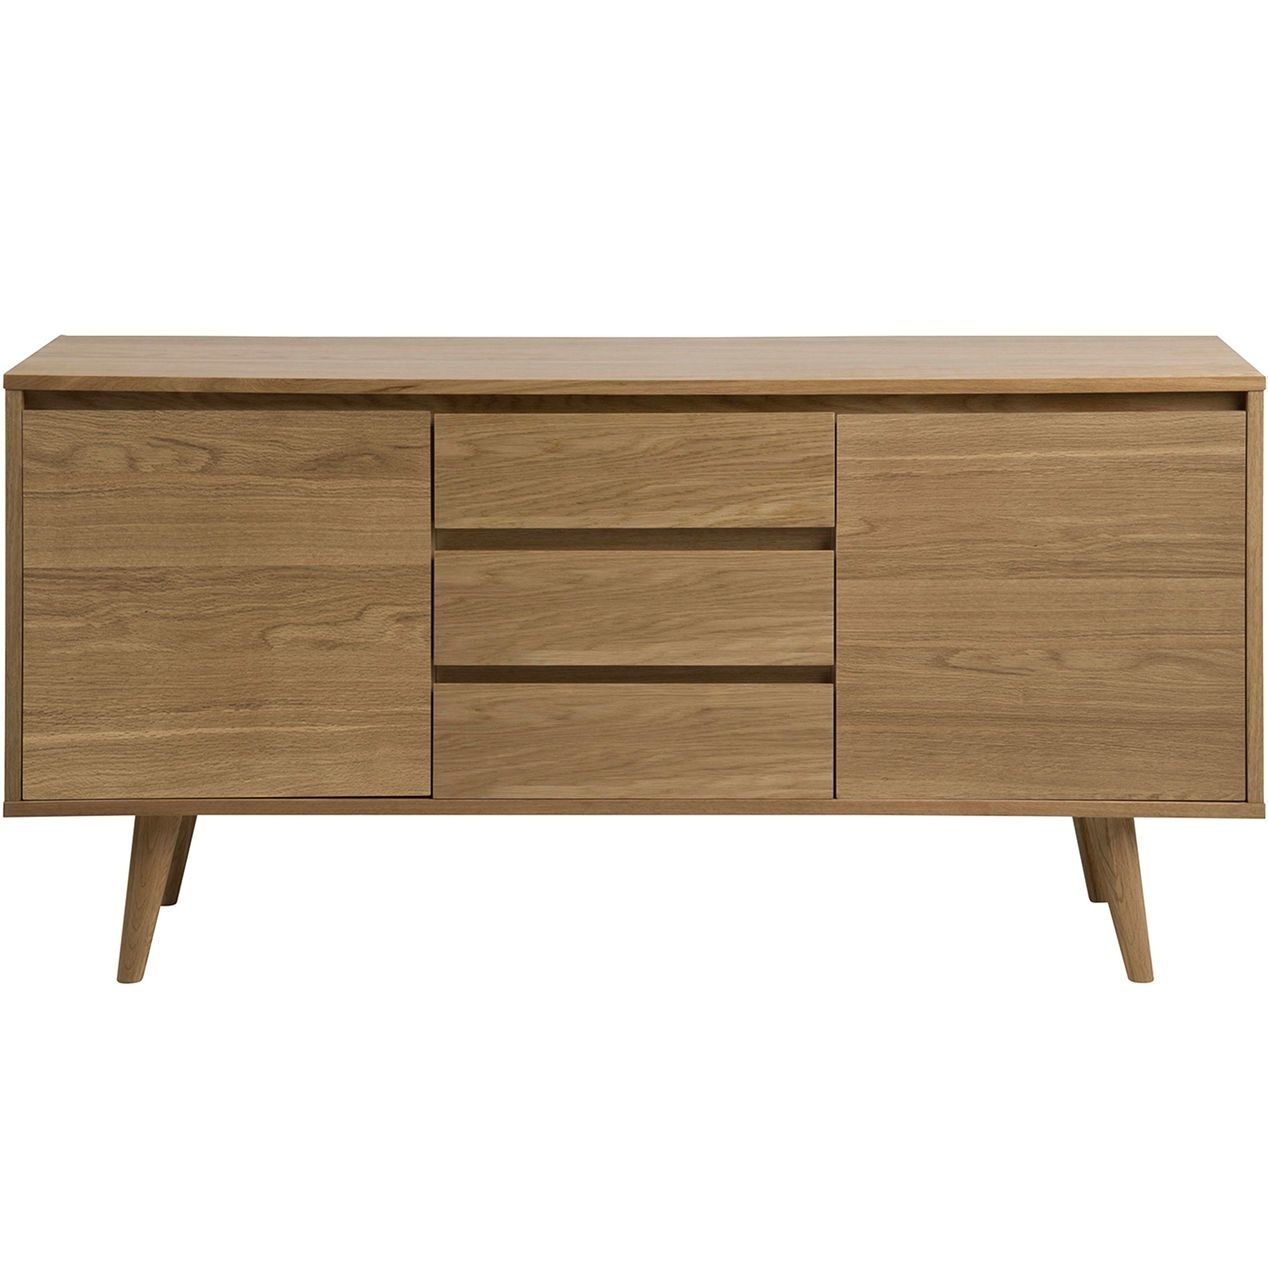 Nagano Sideboard Solid Oak Chest | Dining Room | Pinterest | Solid Within Most Up To Date Lockwood Sideboards (Photo 12 of 20)